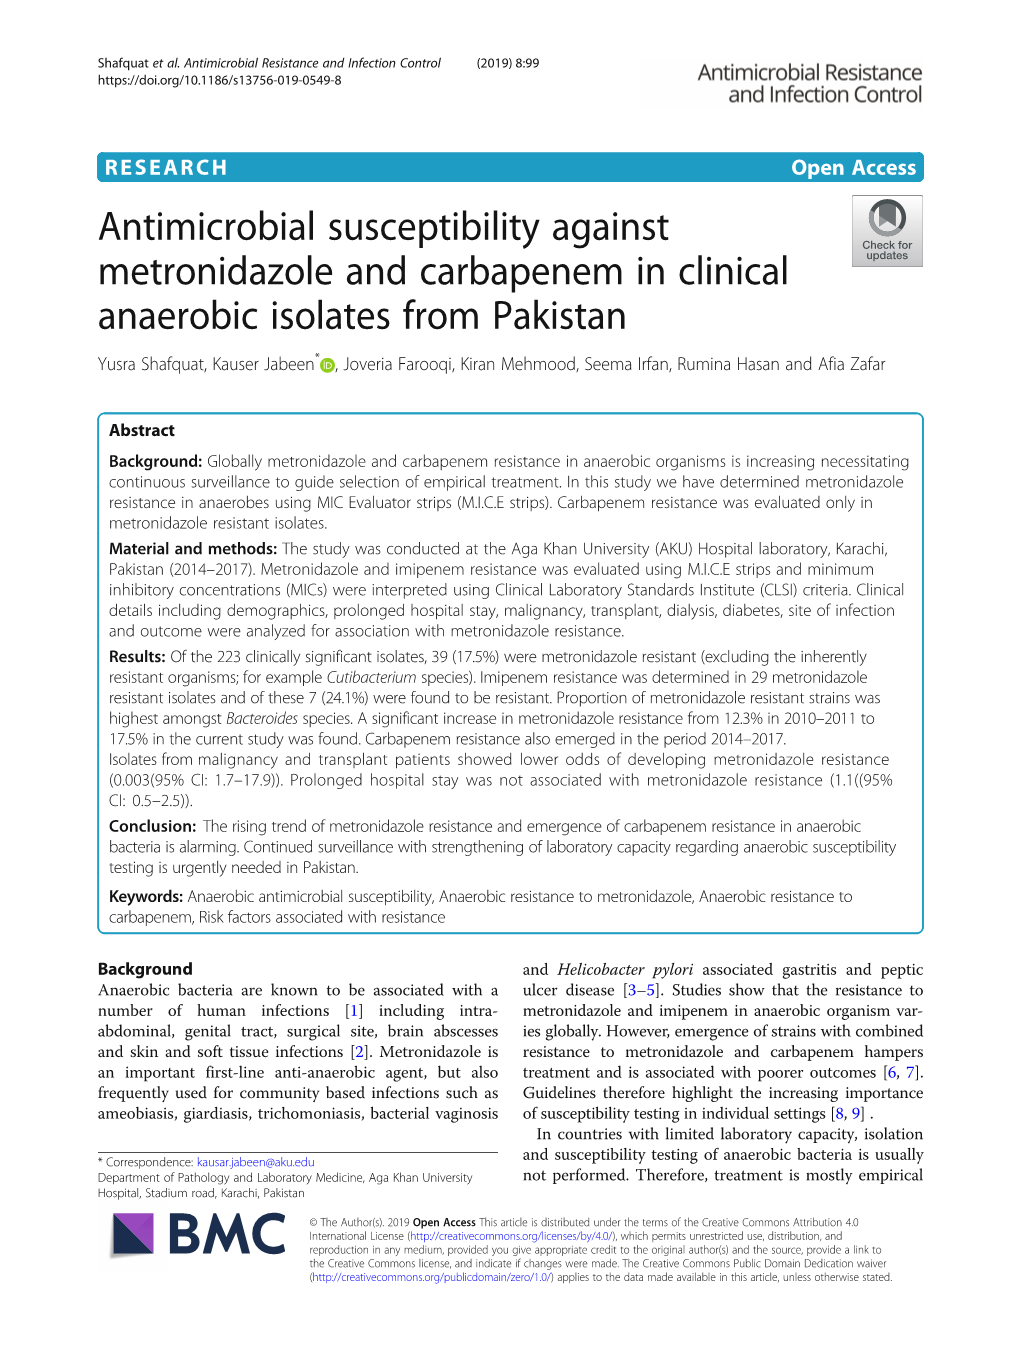 Antimicrobial Susceptibility Against Metronidazole and Carbapenem In